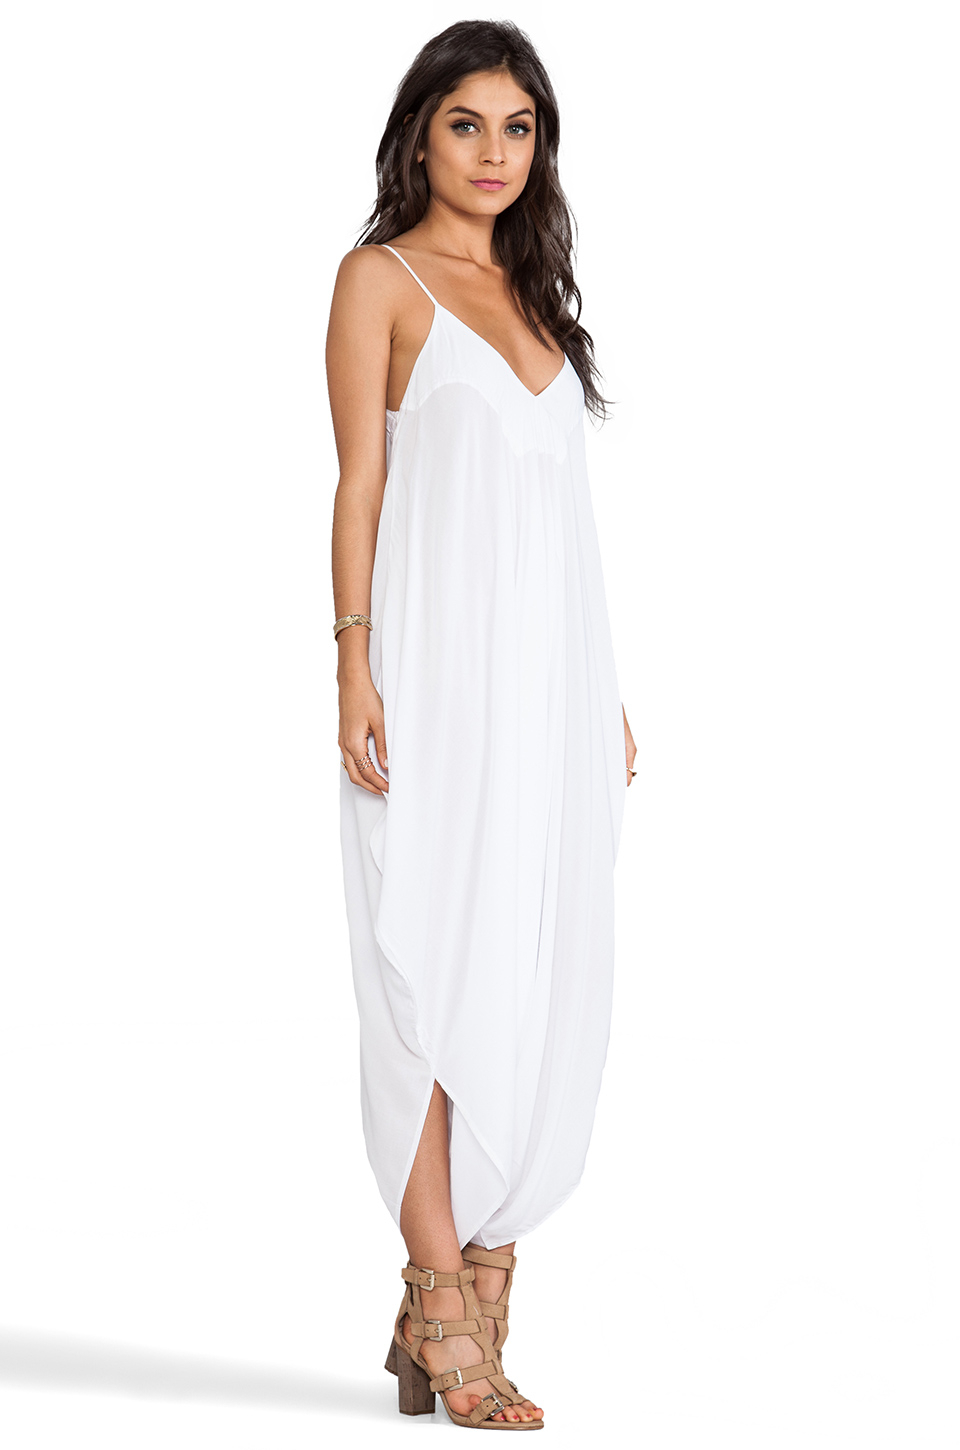 Lyst - Indah Ivory All in One Jumpsuit in White in White